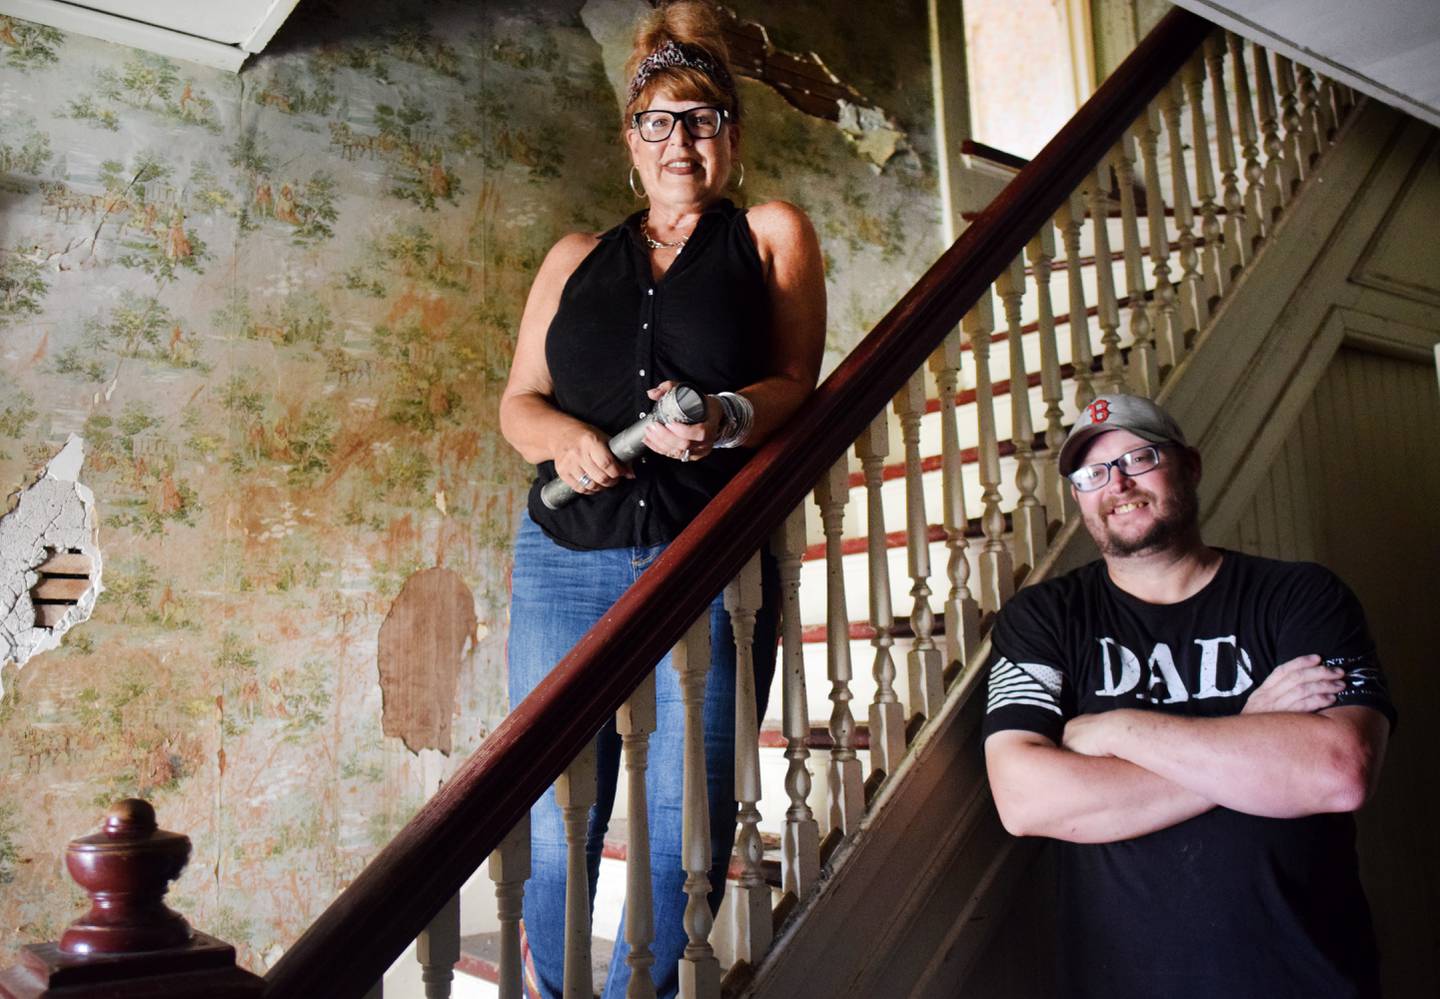 Nancy Solvera of Carmel, New York, and Roger Sizer of Newton stand by the atrium of a 112-year-old building at 427 N. Third Ave. E. in Newton. Solvera says she's obsessed with the house her family owned at one point, and she wants to bring it back to life.